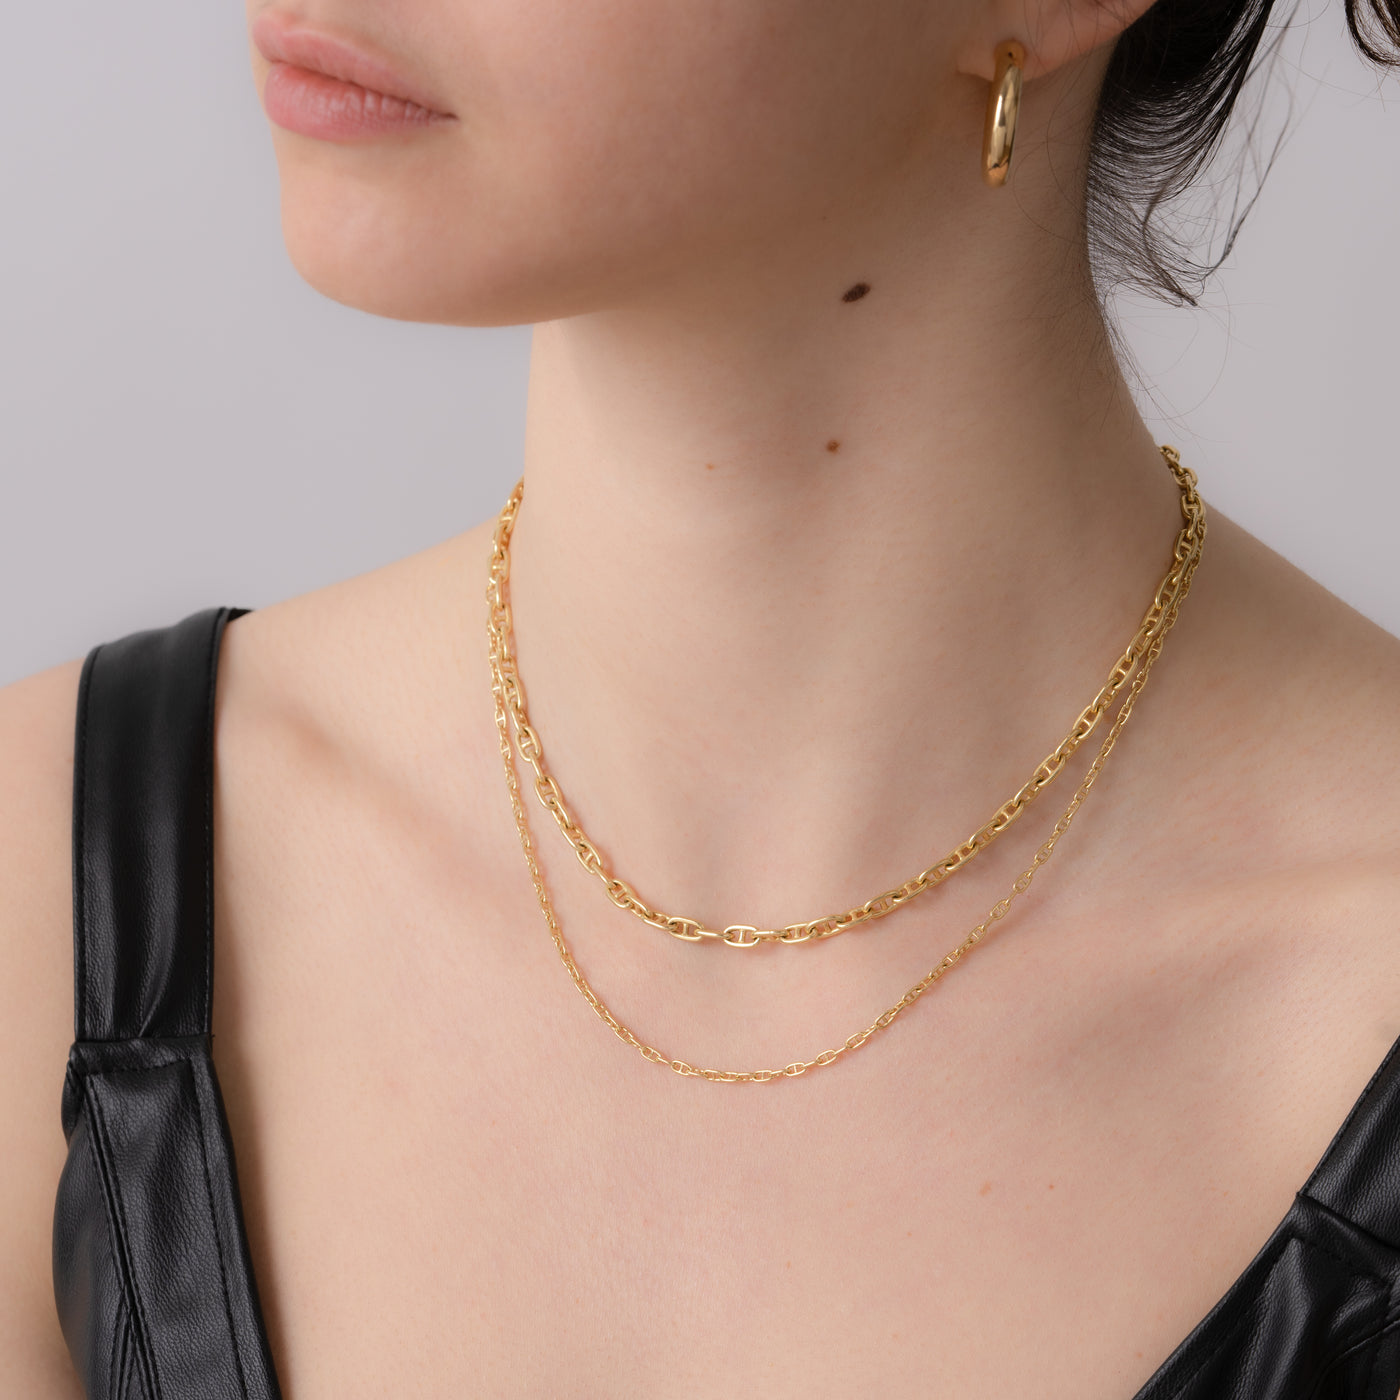 14K SOLID GOLD BABY AND LARGE MARINE LINK CHAIN